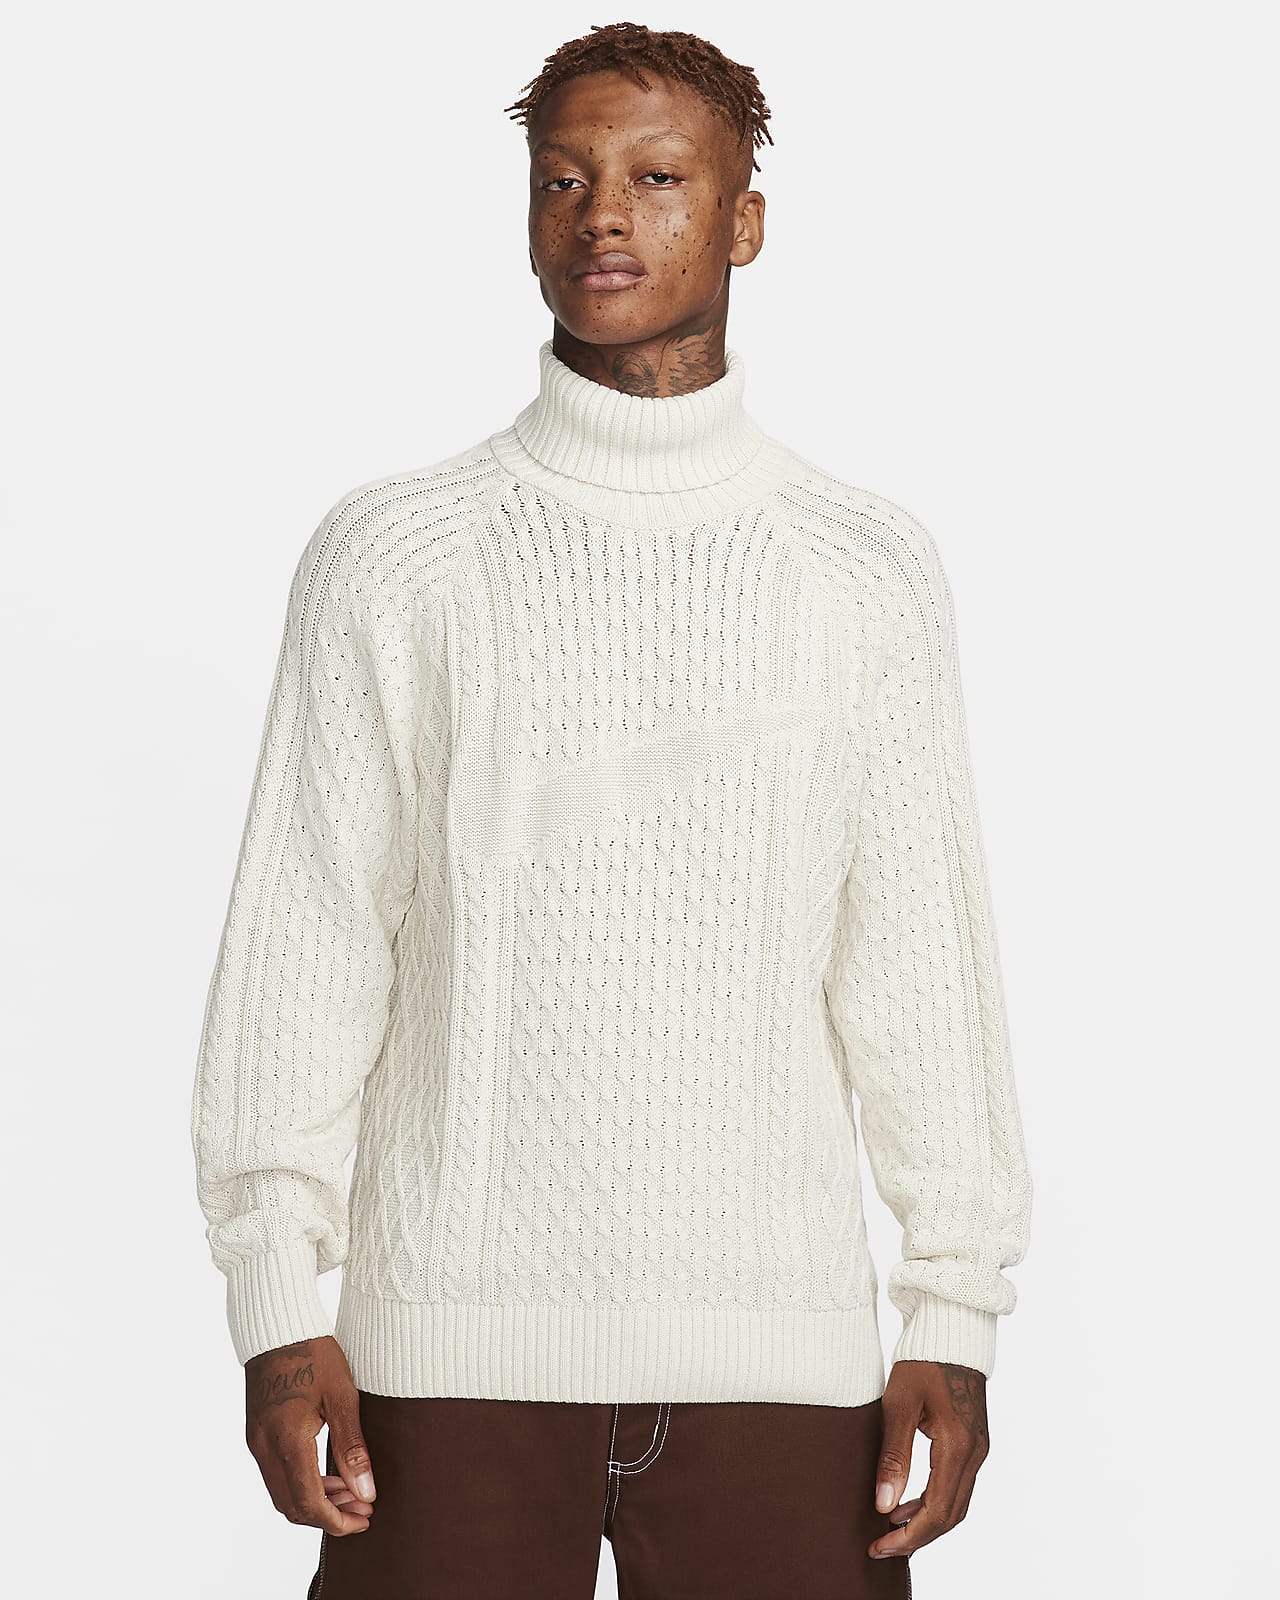 Nike Men's Life Cable Knit Turtleneck Sweater